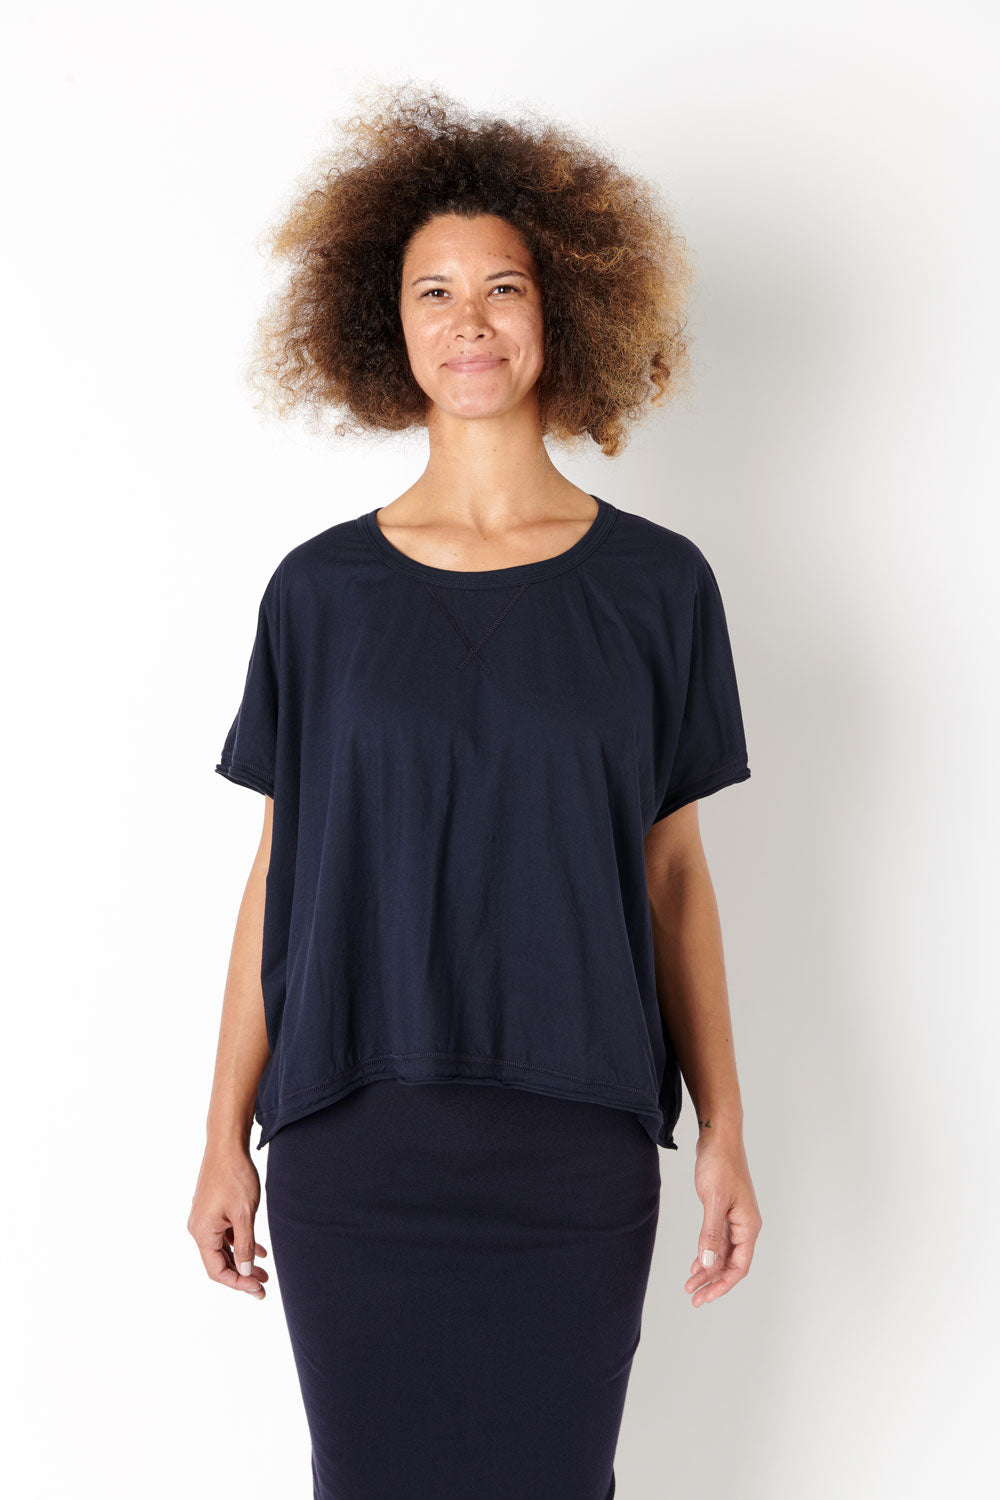 Alabama Chanin Coverup with short sleeves, shown in Navy color on model.